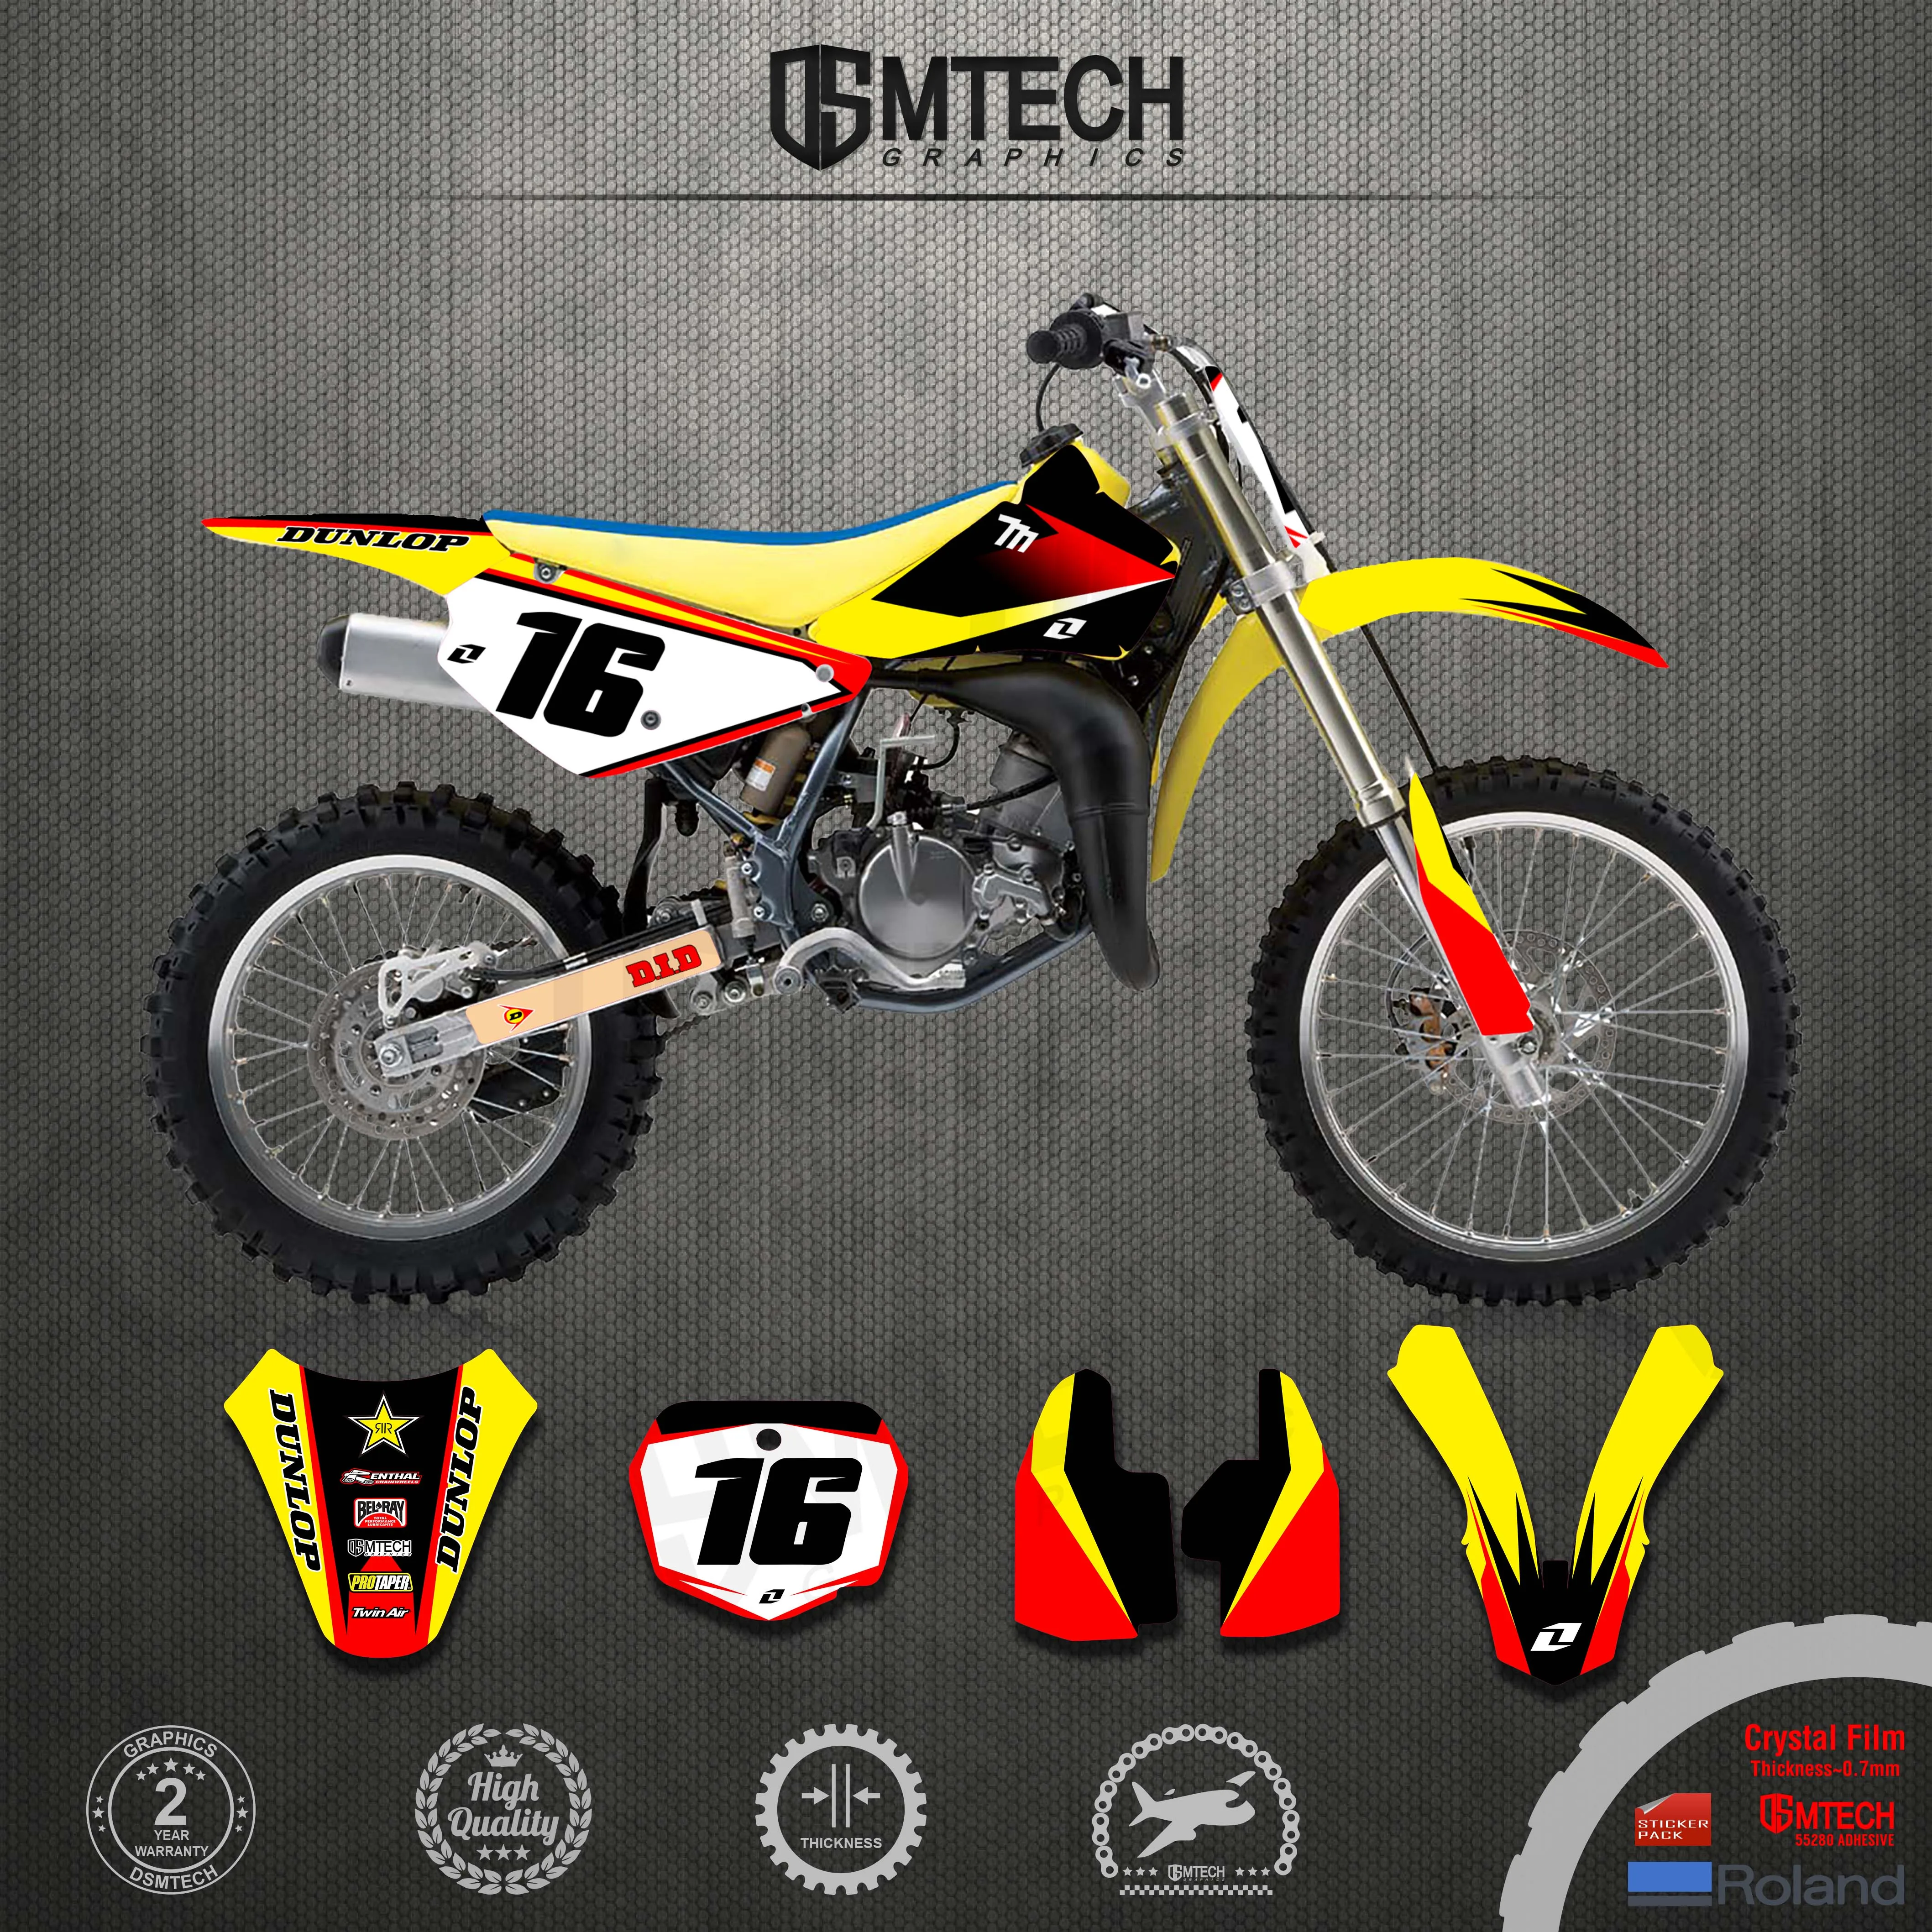 DSMTECH Graphics Background Stickers Decals For Suzuki RM85 RM 85 2001-2004  2005- 2011 2012 2013-2018 Personality Sticker Decal